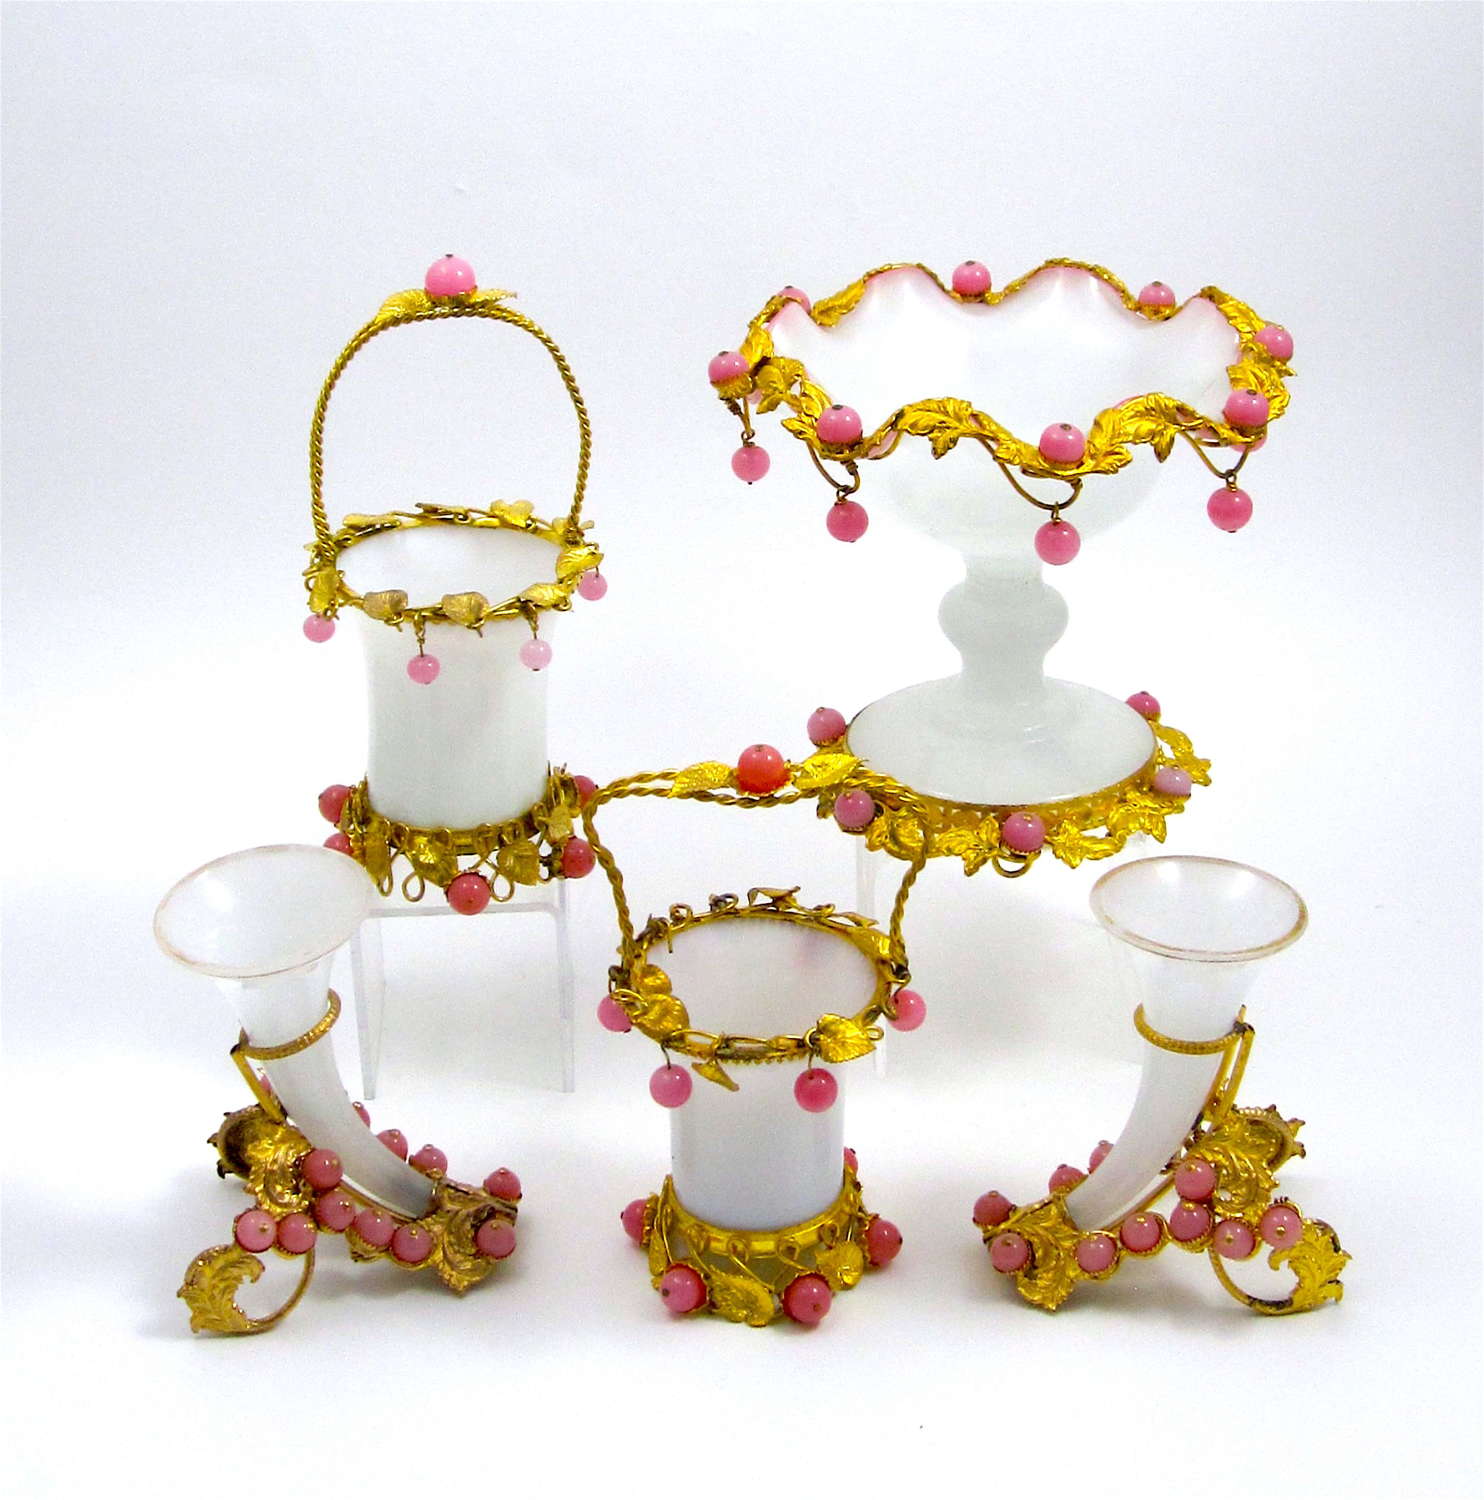 A Collection of White Opaline Glass Items with Pink Baubles